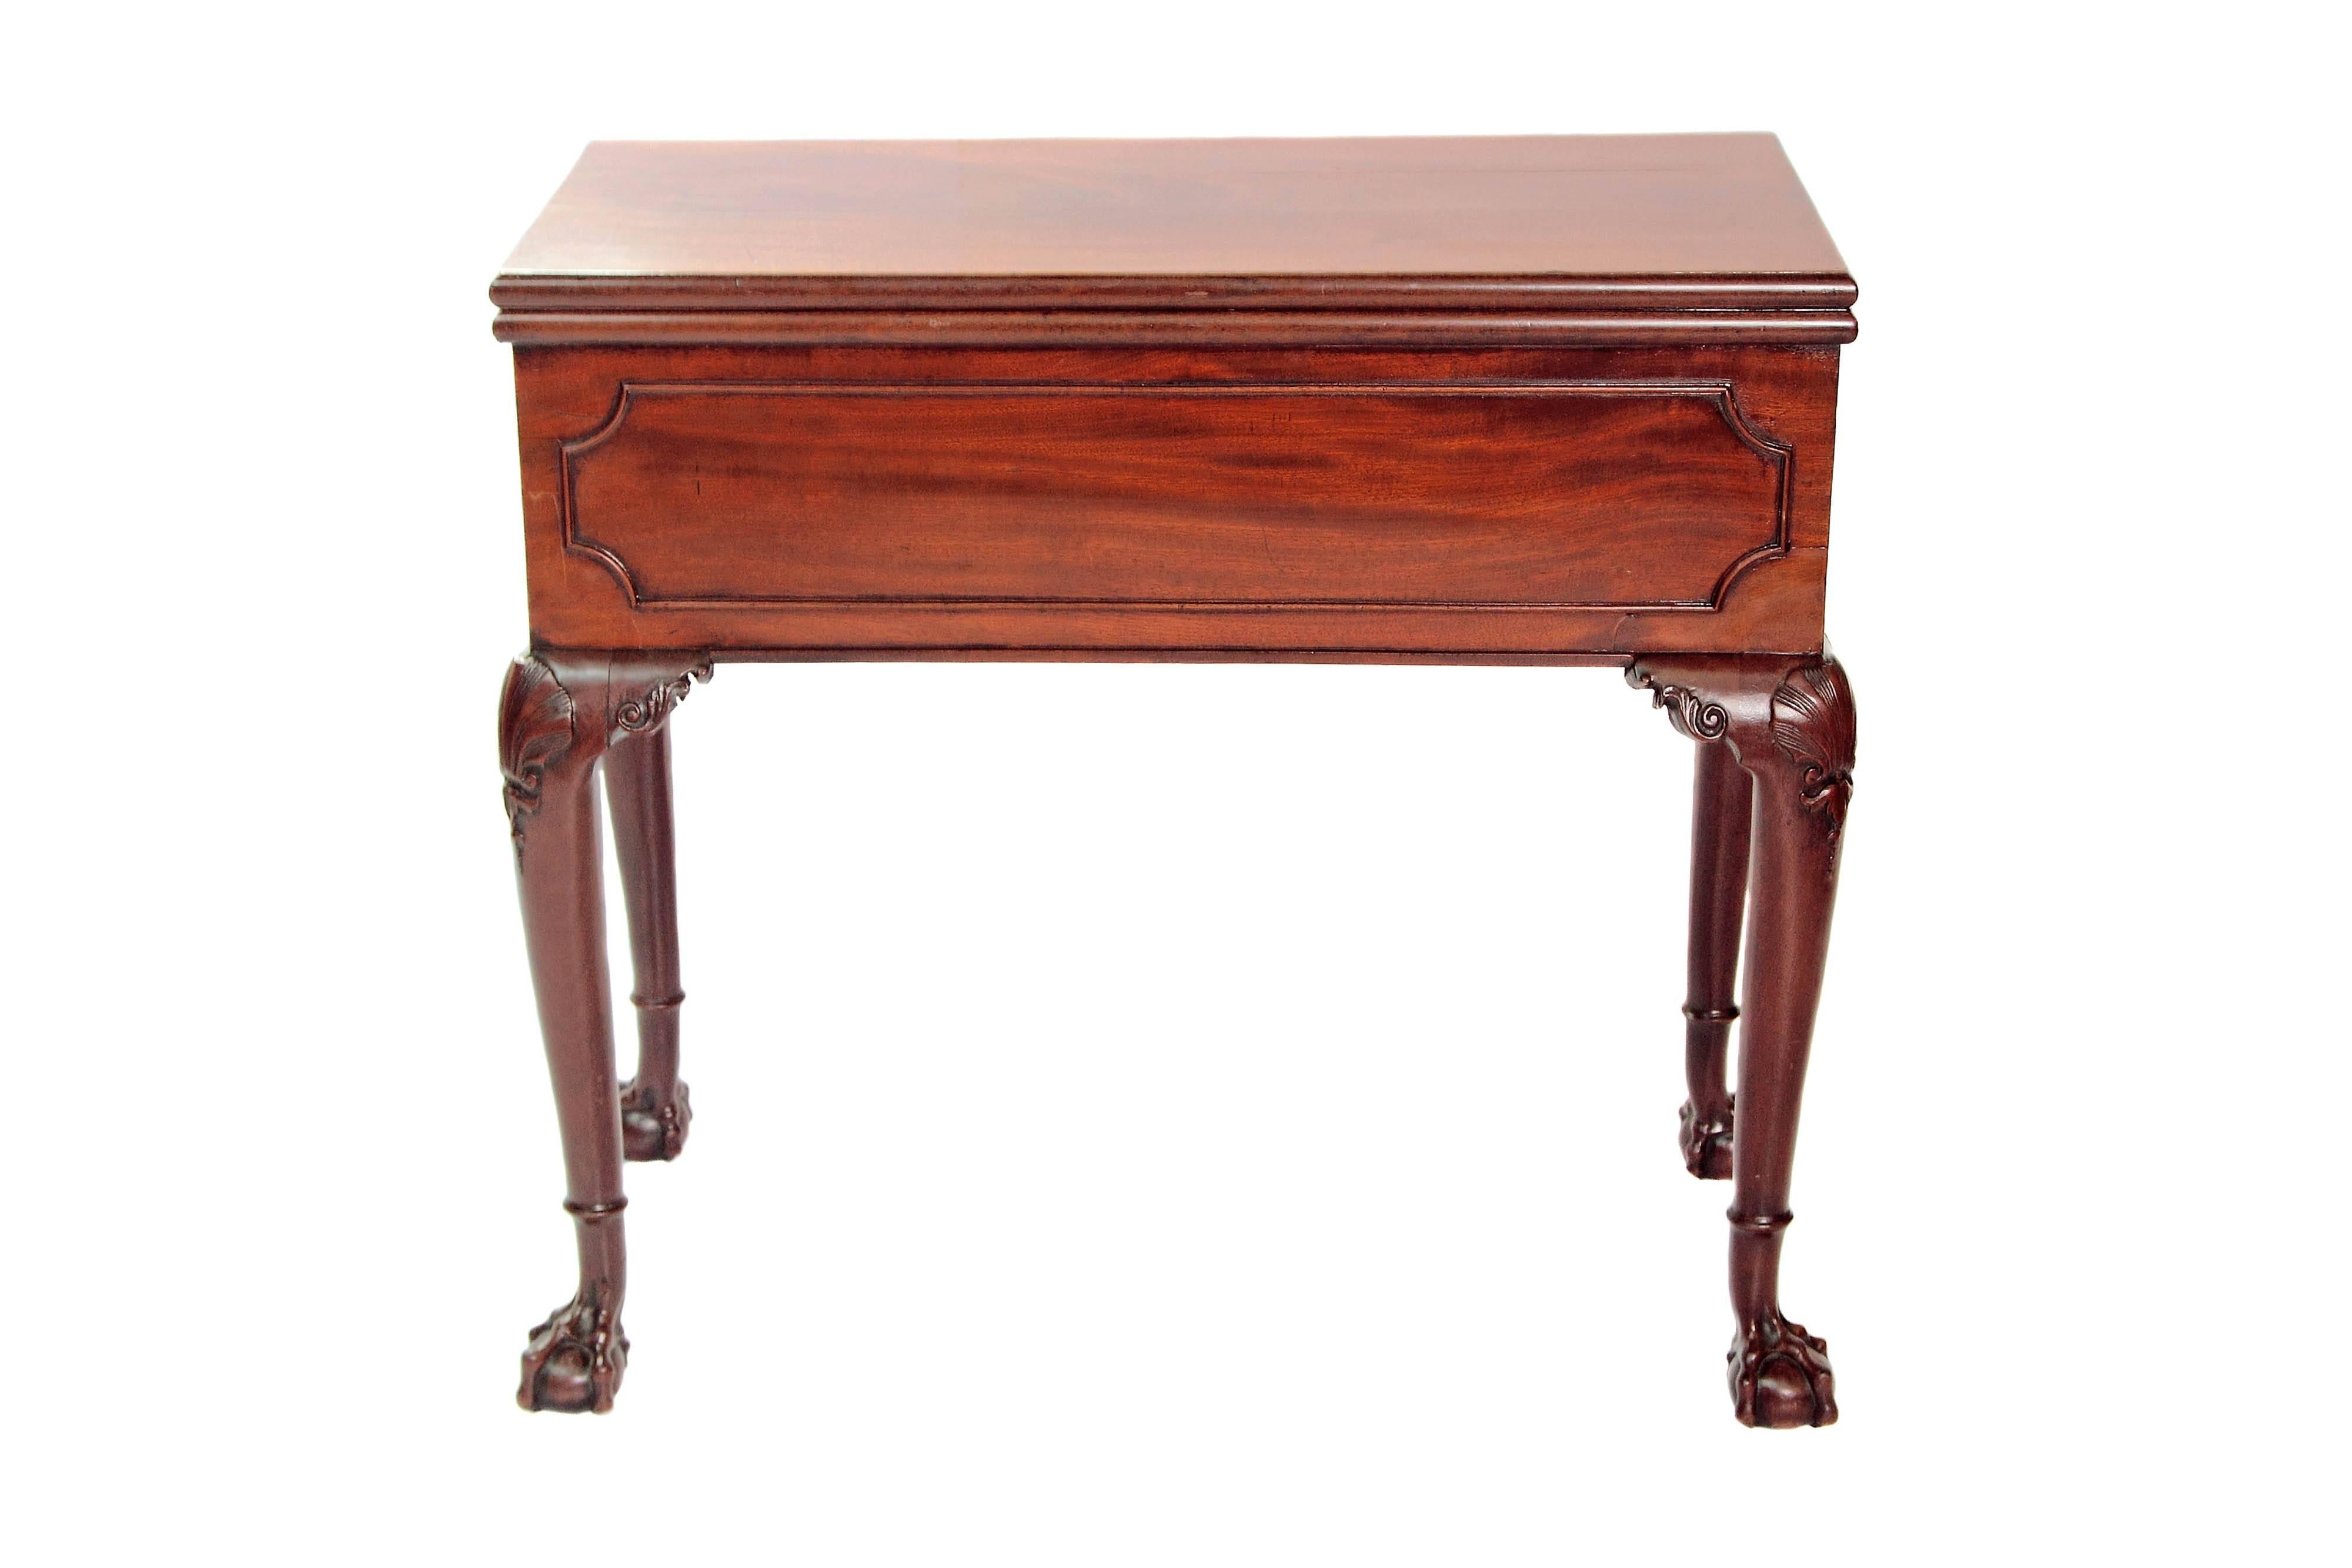 A George II mahogany pier/tea/games bureau-table. The mahogany top is supported on a hinged back leg when opened. The top when opened conceals the game table and a harlequin pop-up cabinet which contains drawers and paper pigeon holes. All rests on